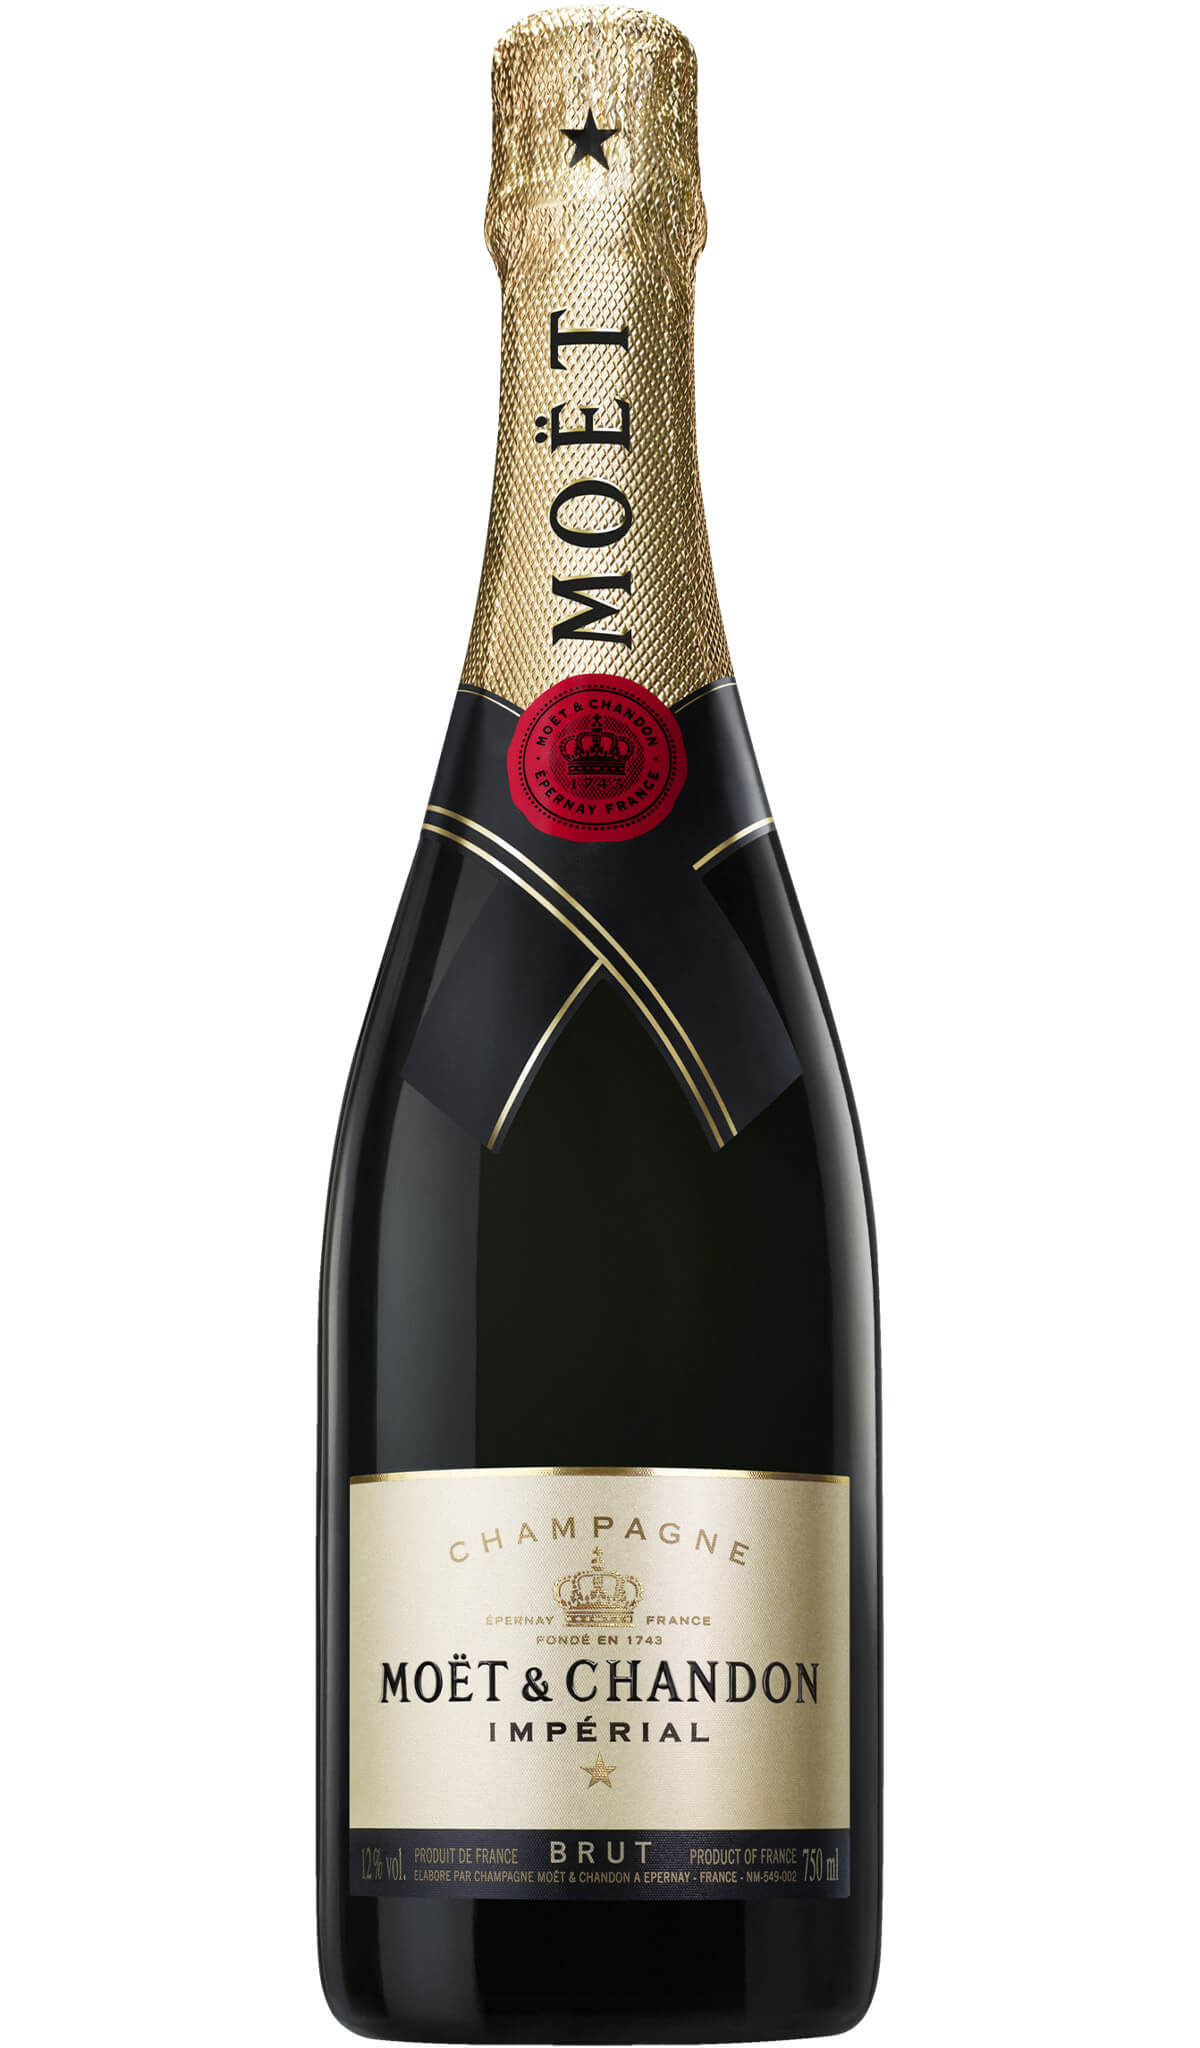 Find out more or buy Moët & Chandon Brut Impérial NV (Champagne) online at Wine Sellers Direct - Australia’s independent liquor specialists.